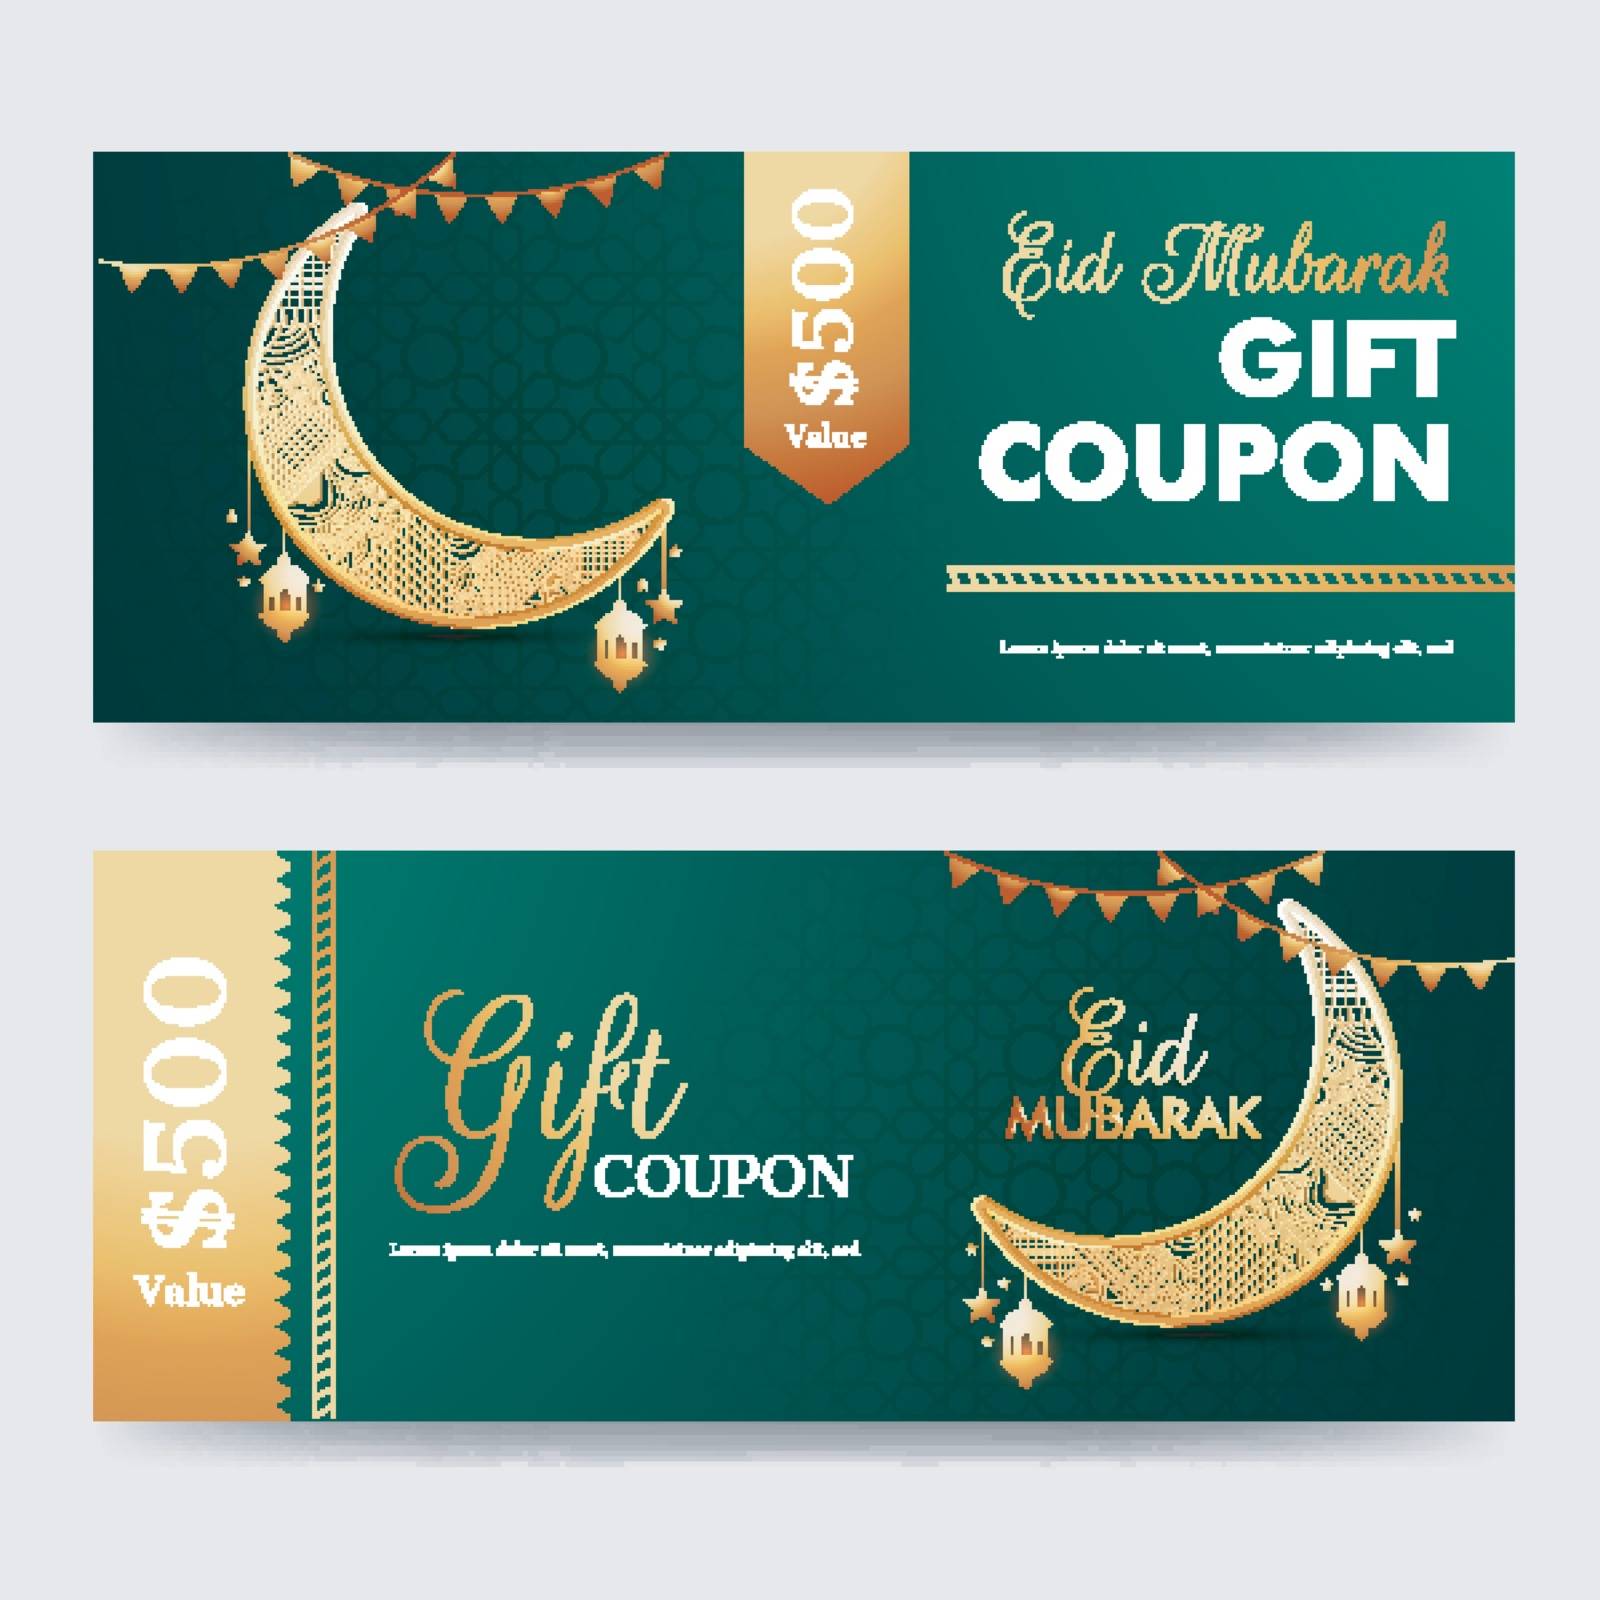 Gift Coupon or voucher layout collection with ornament crescent moon and discount offer for Eid Mubarak celebration.